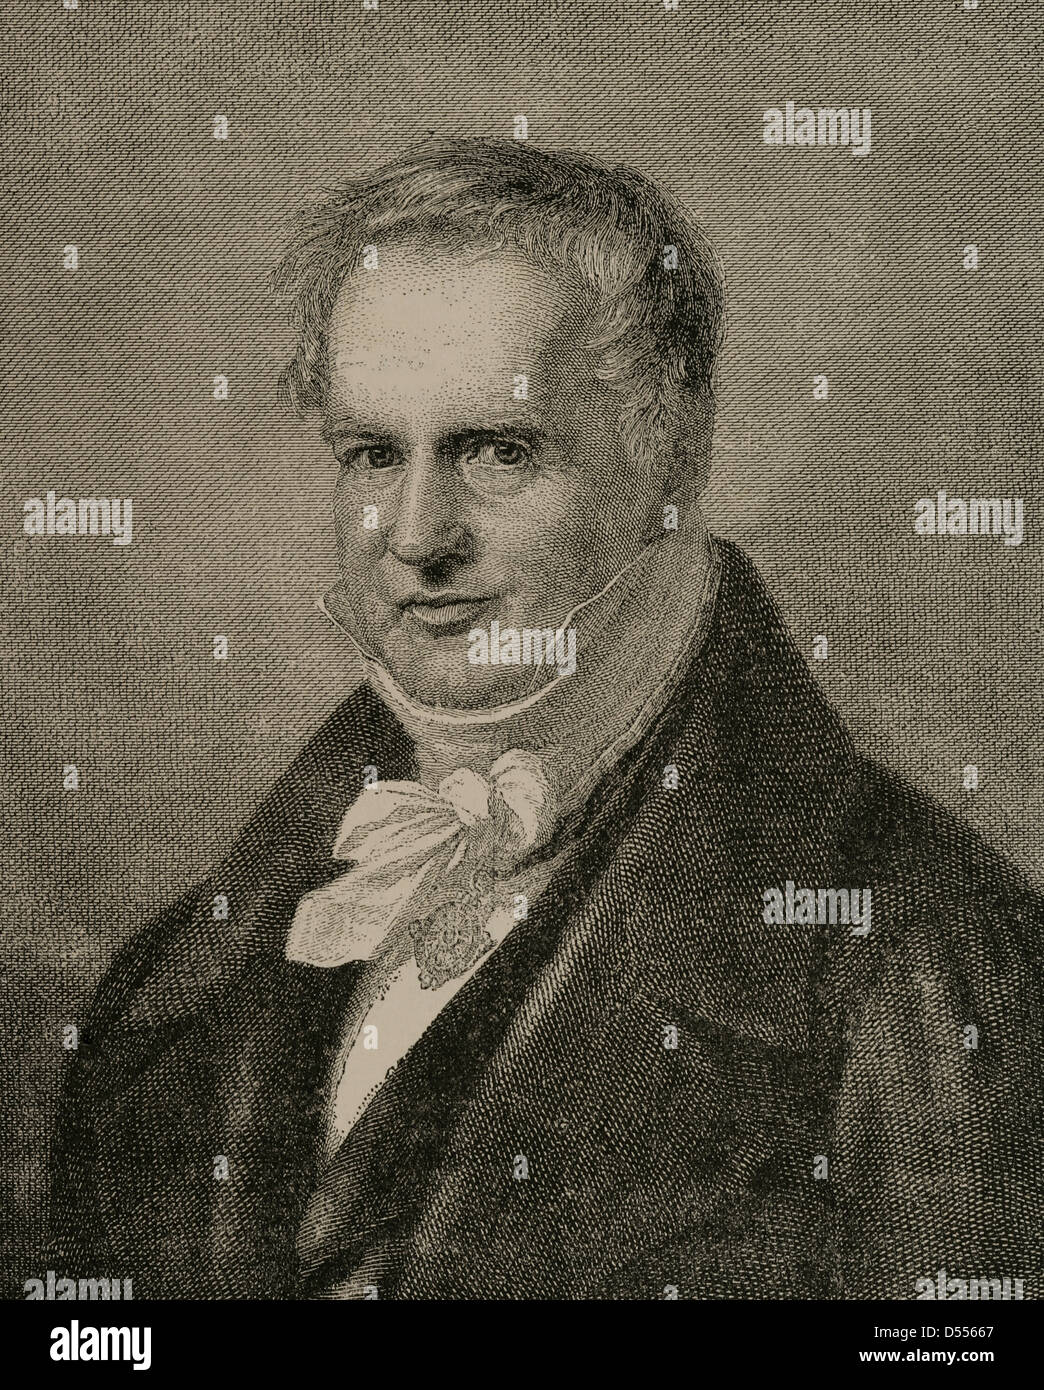 Alexander von Humboldt (1769-1859). German naturalist and geographer. Engraving of A. Neumann in Our Century, 1883. Stock Photo